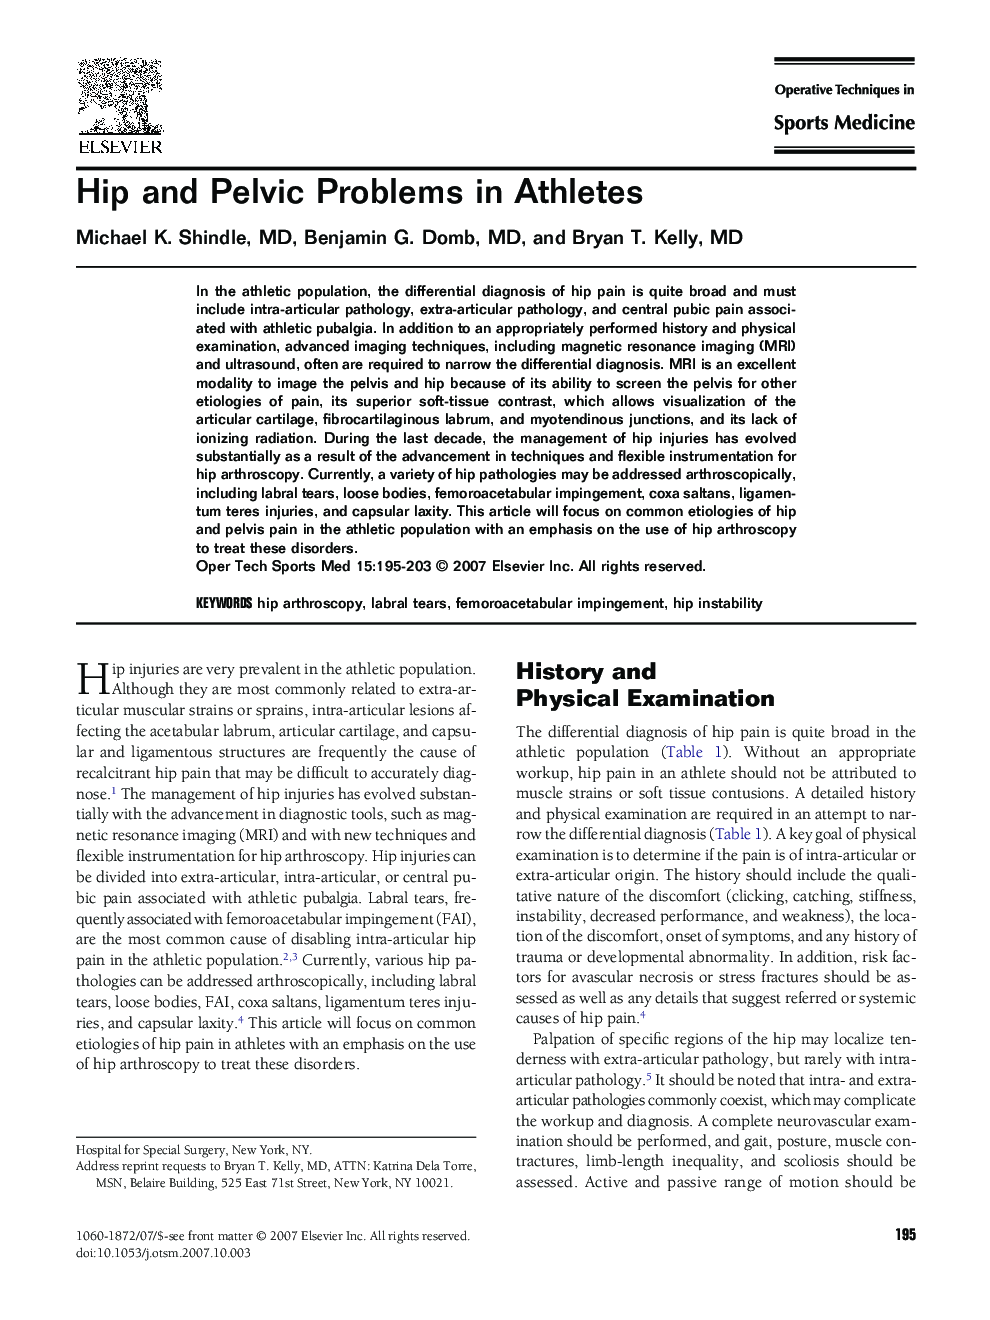 Hip and Pelvic Problems in Athletes